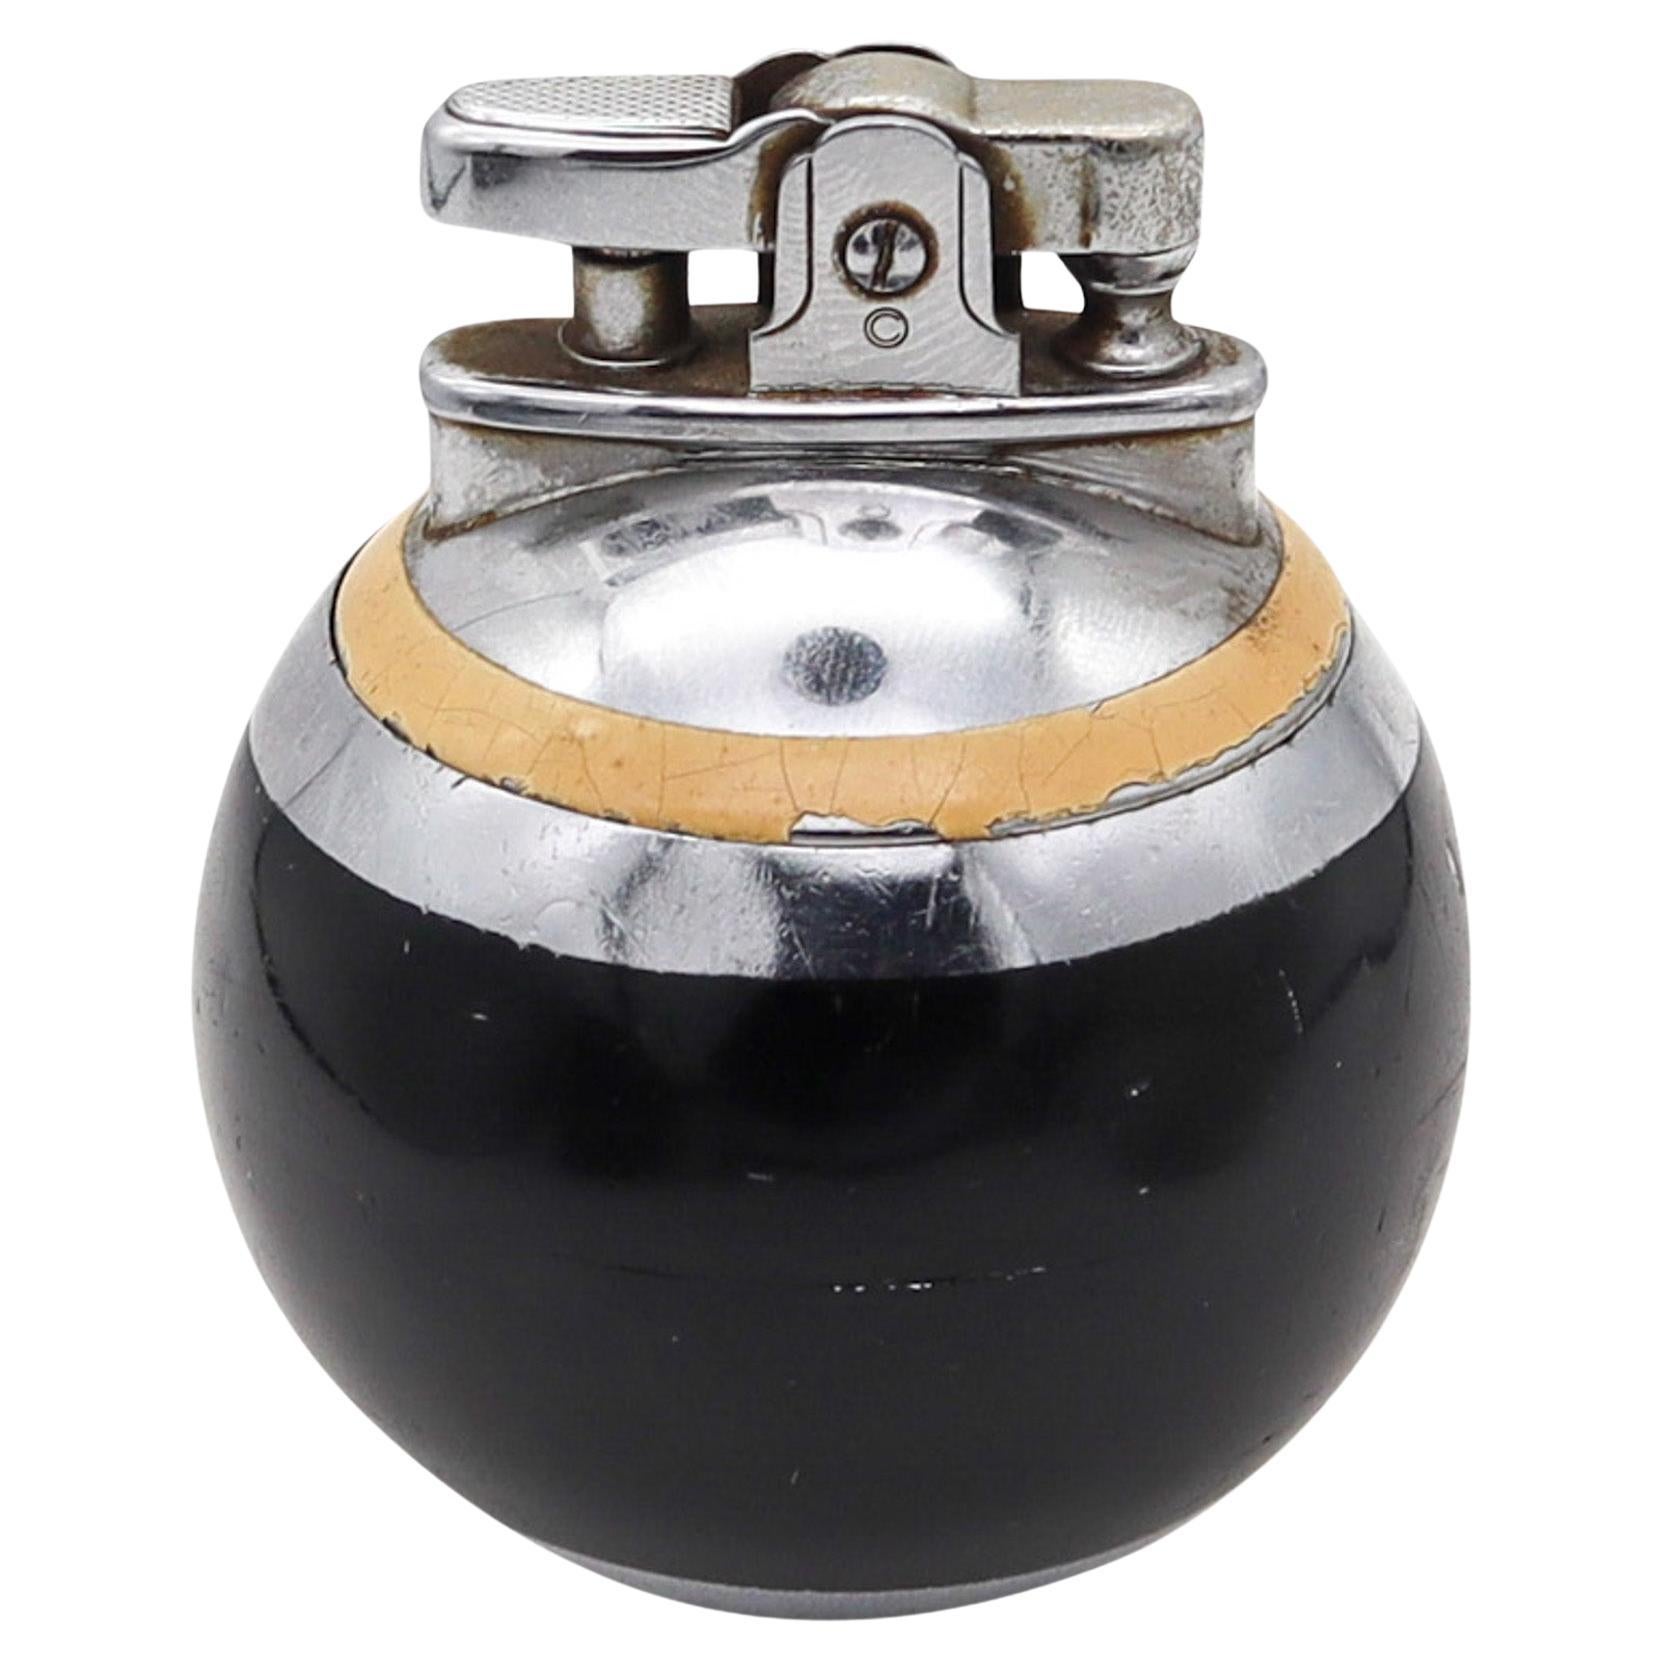 Ronson England 1929 Deco RonDeLight Steel Table Lighter Black & Cream Lacquer  For Sale